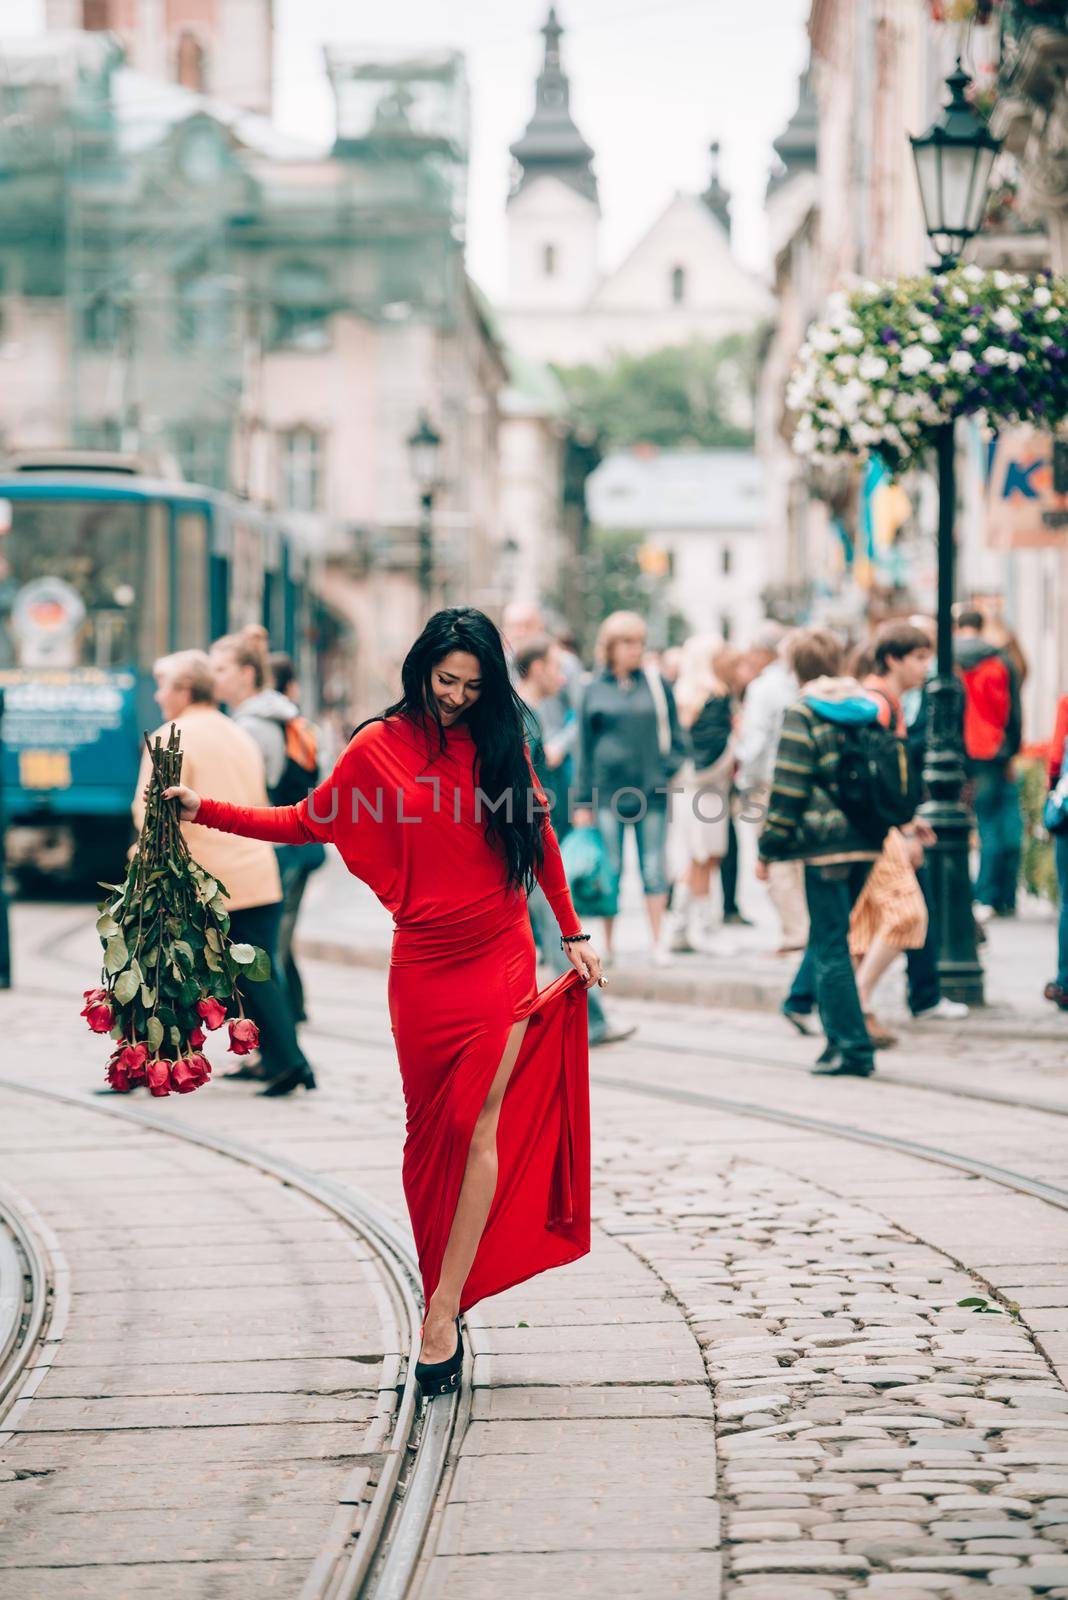 Charming young woman in red sexy dress posing with a bouquet of red roses. photo of a seductive woman with black hair on the city streets. Selective focus, filmgrain.